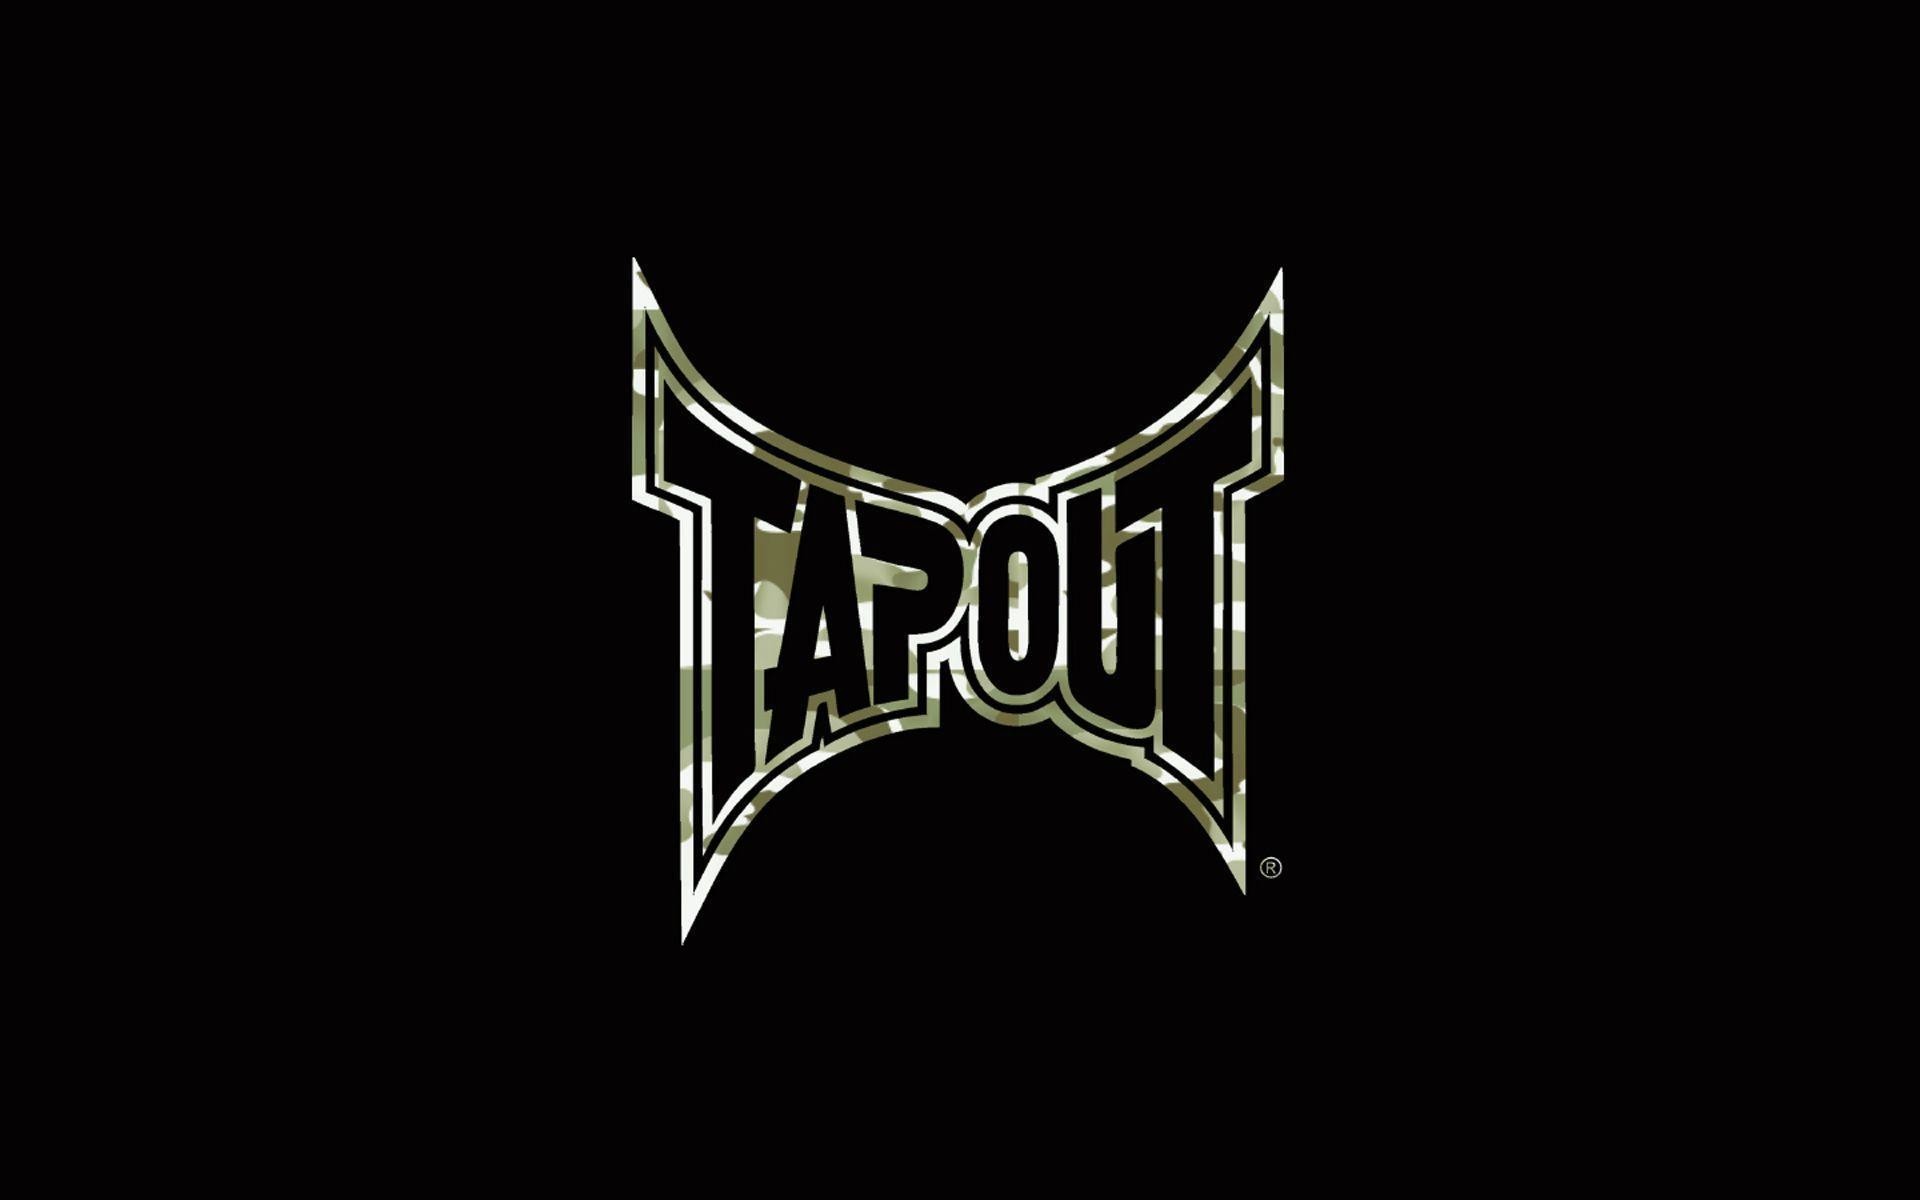 1920x1200 Tapout Wallpapers - Full HD wallpaper search